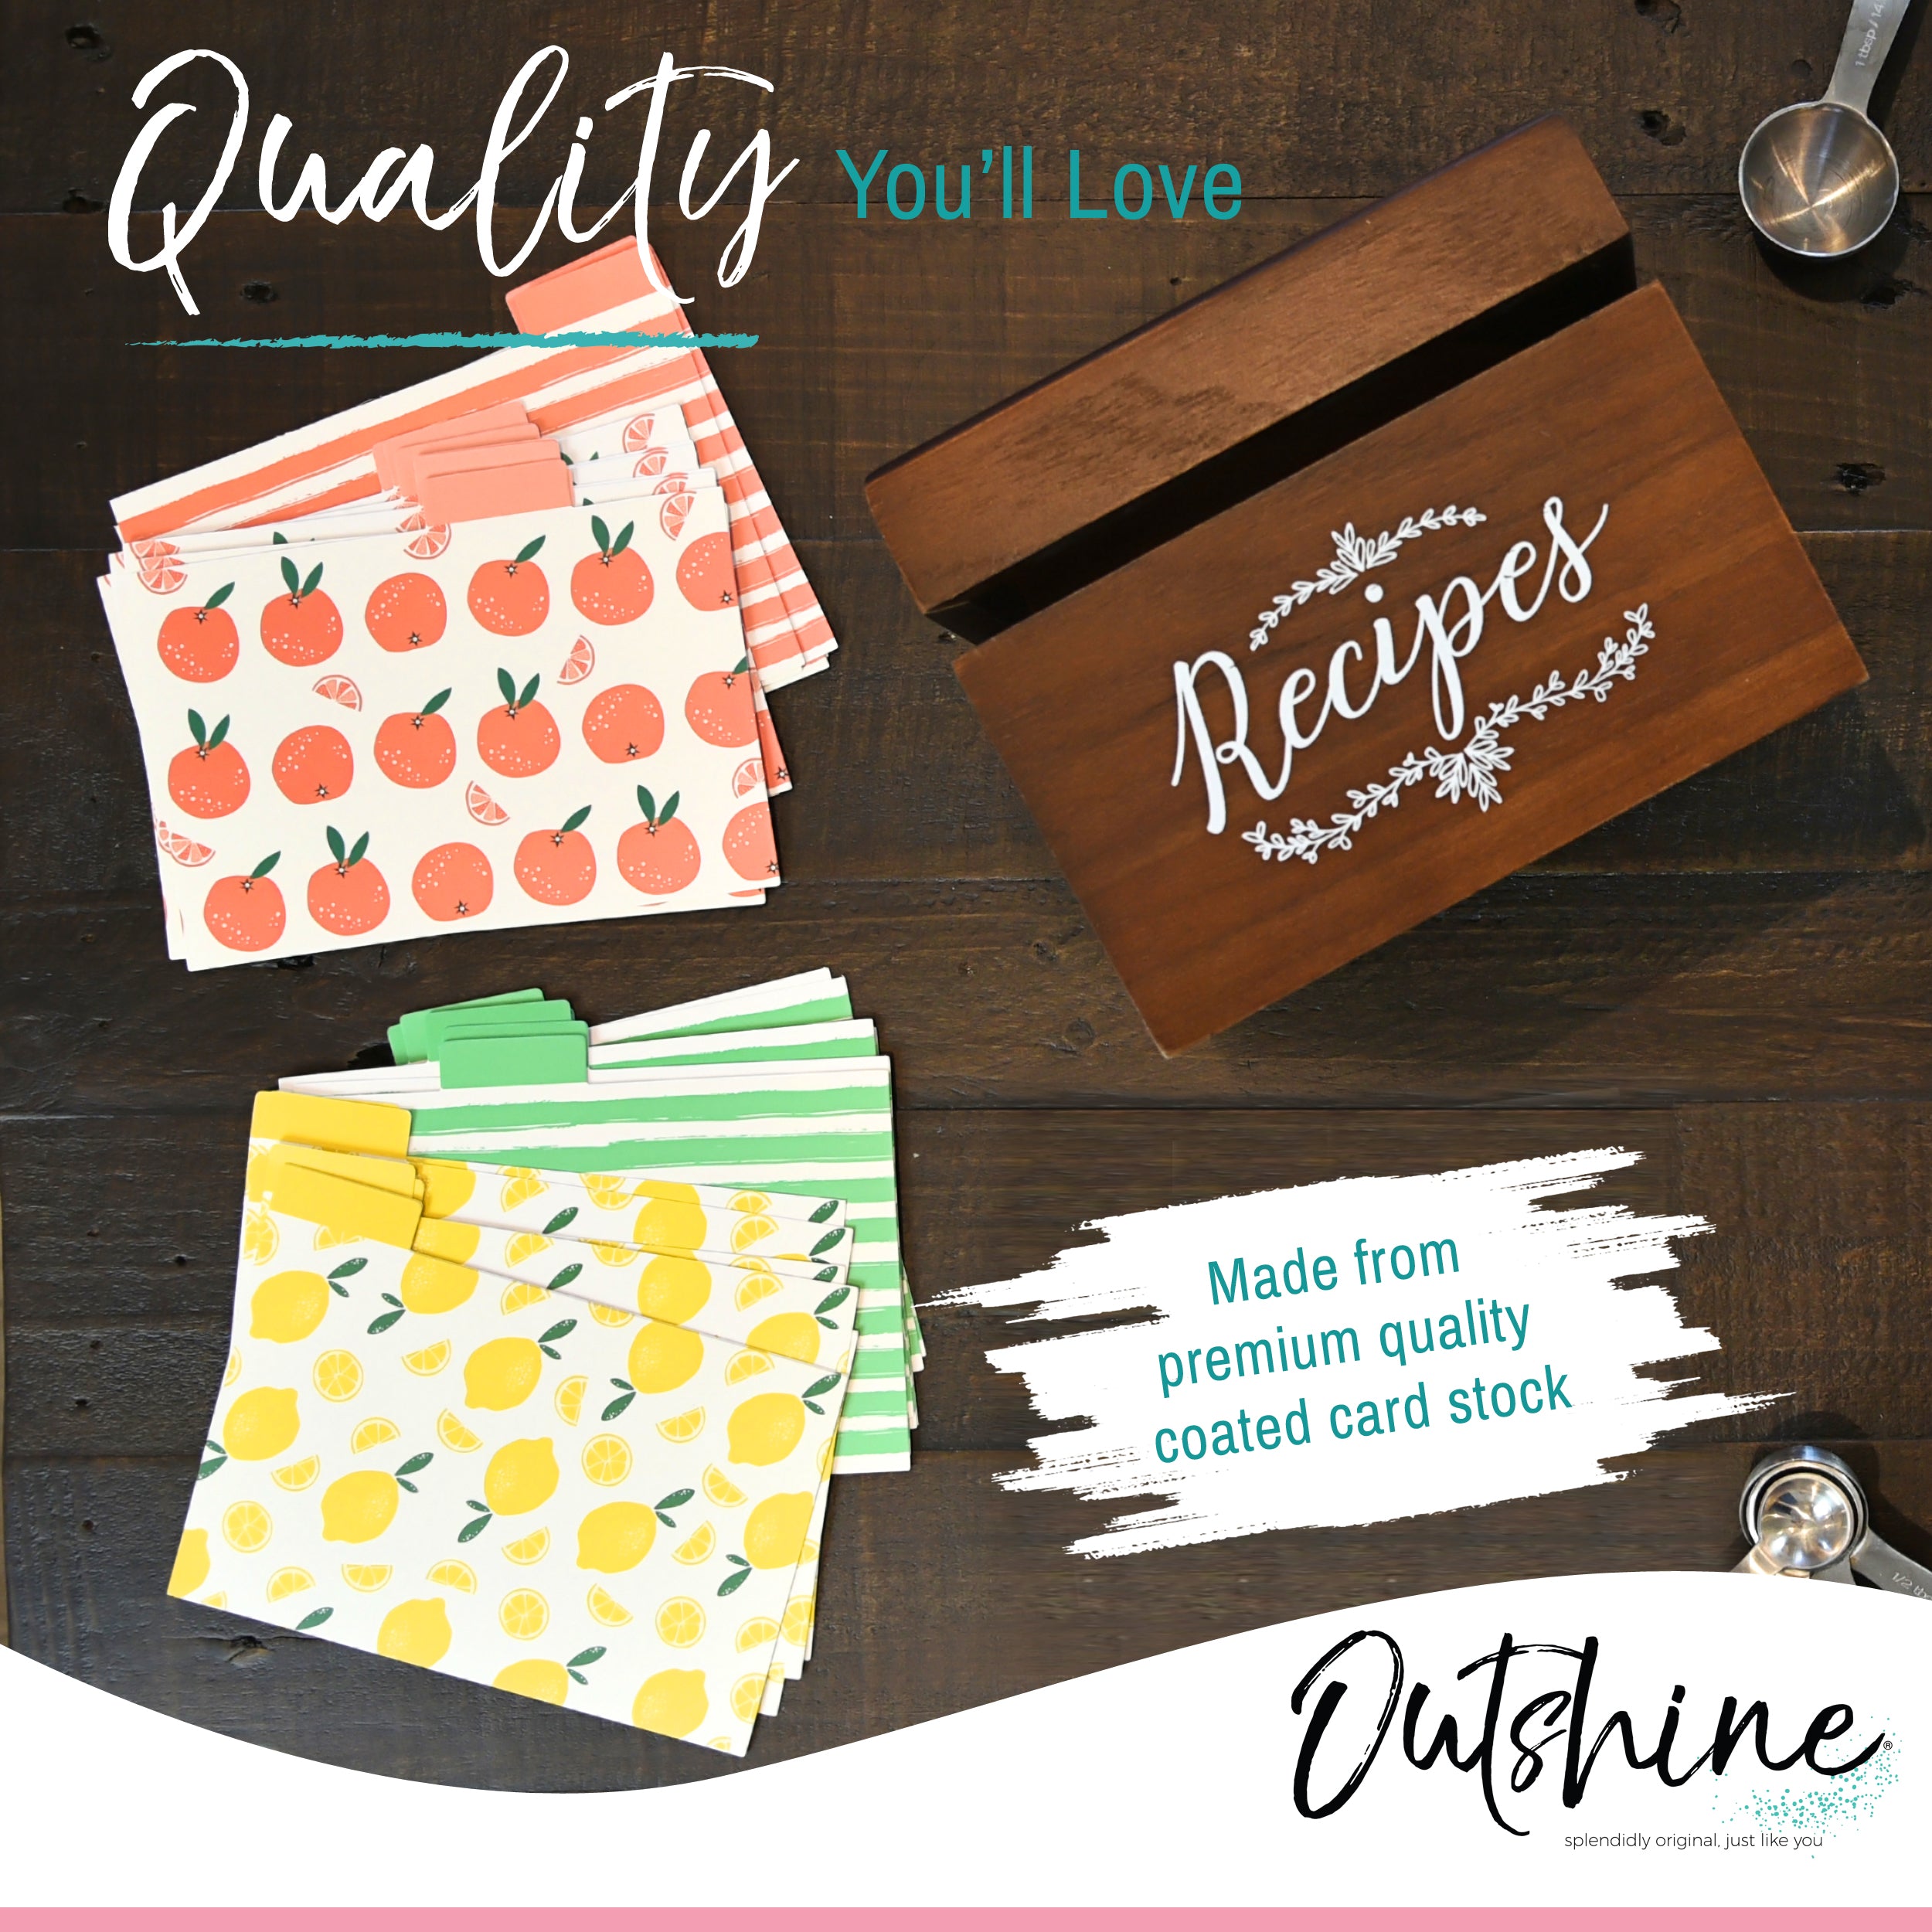 Outshine Floral Recipe Cards with Dividers (Set of 104) | 100 Blank Recipe  Cards 4x6 Inches with 4 Recipe Card Dividers with Tabs | Double Sided Thick